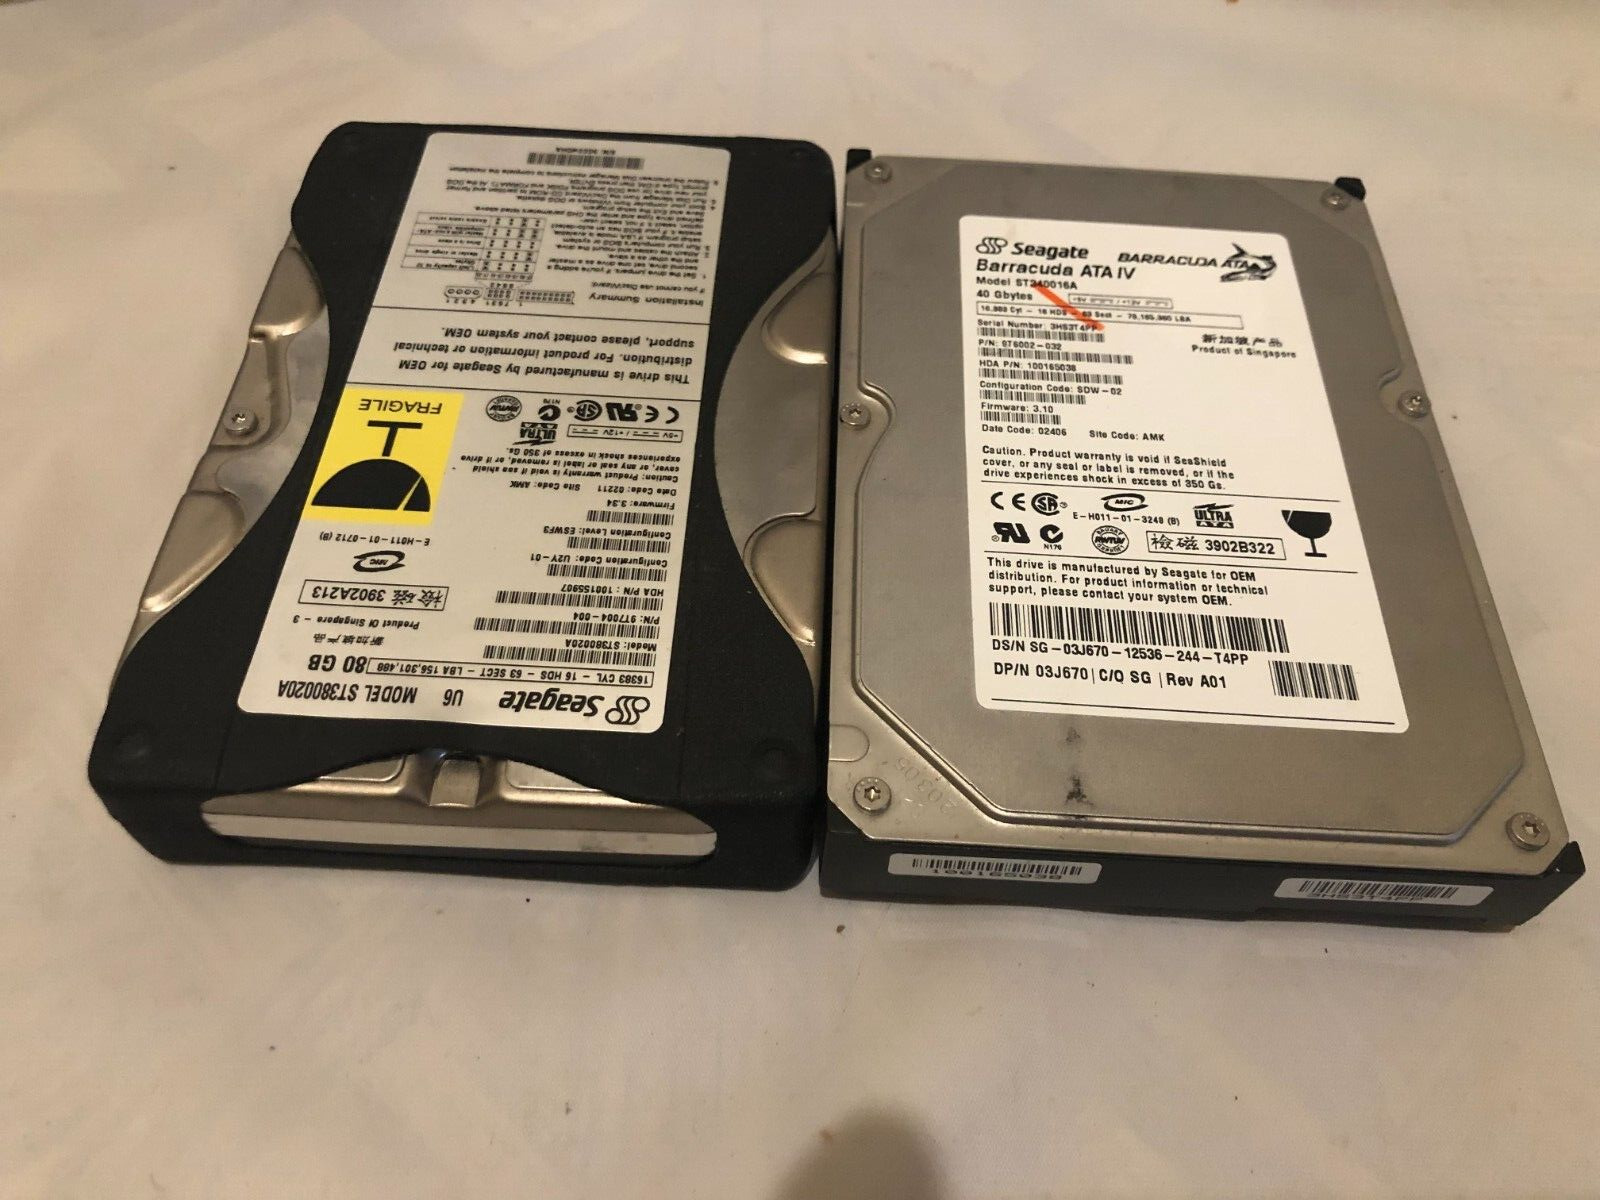 Seagate Hard Drives (2) Lot Untested Parts/Non-Working